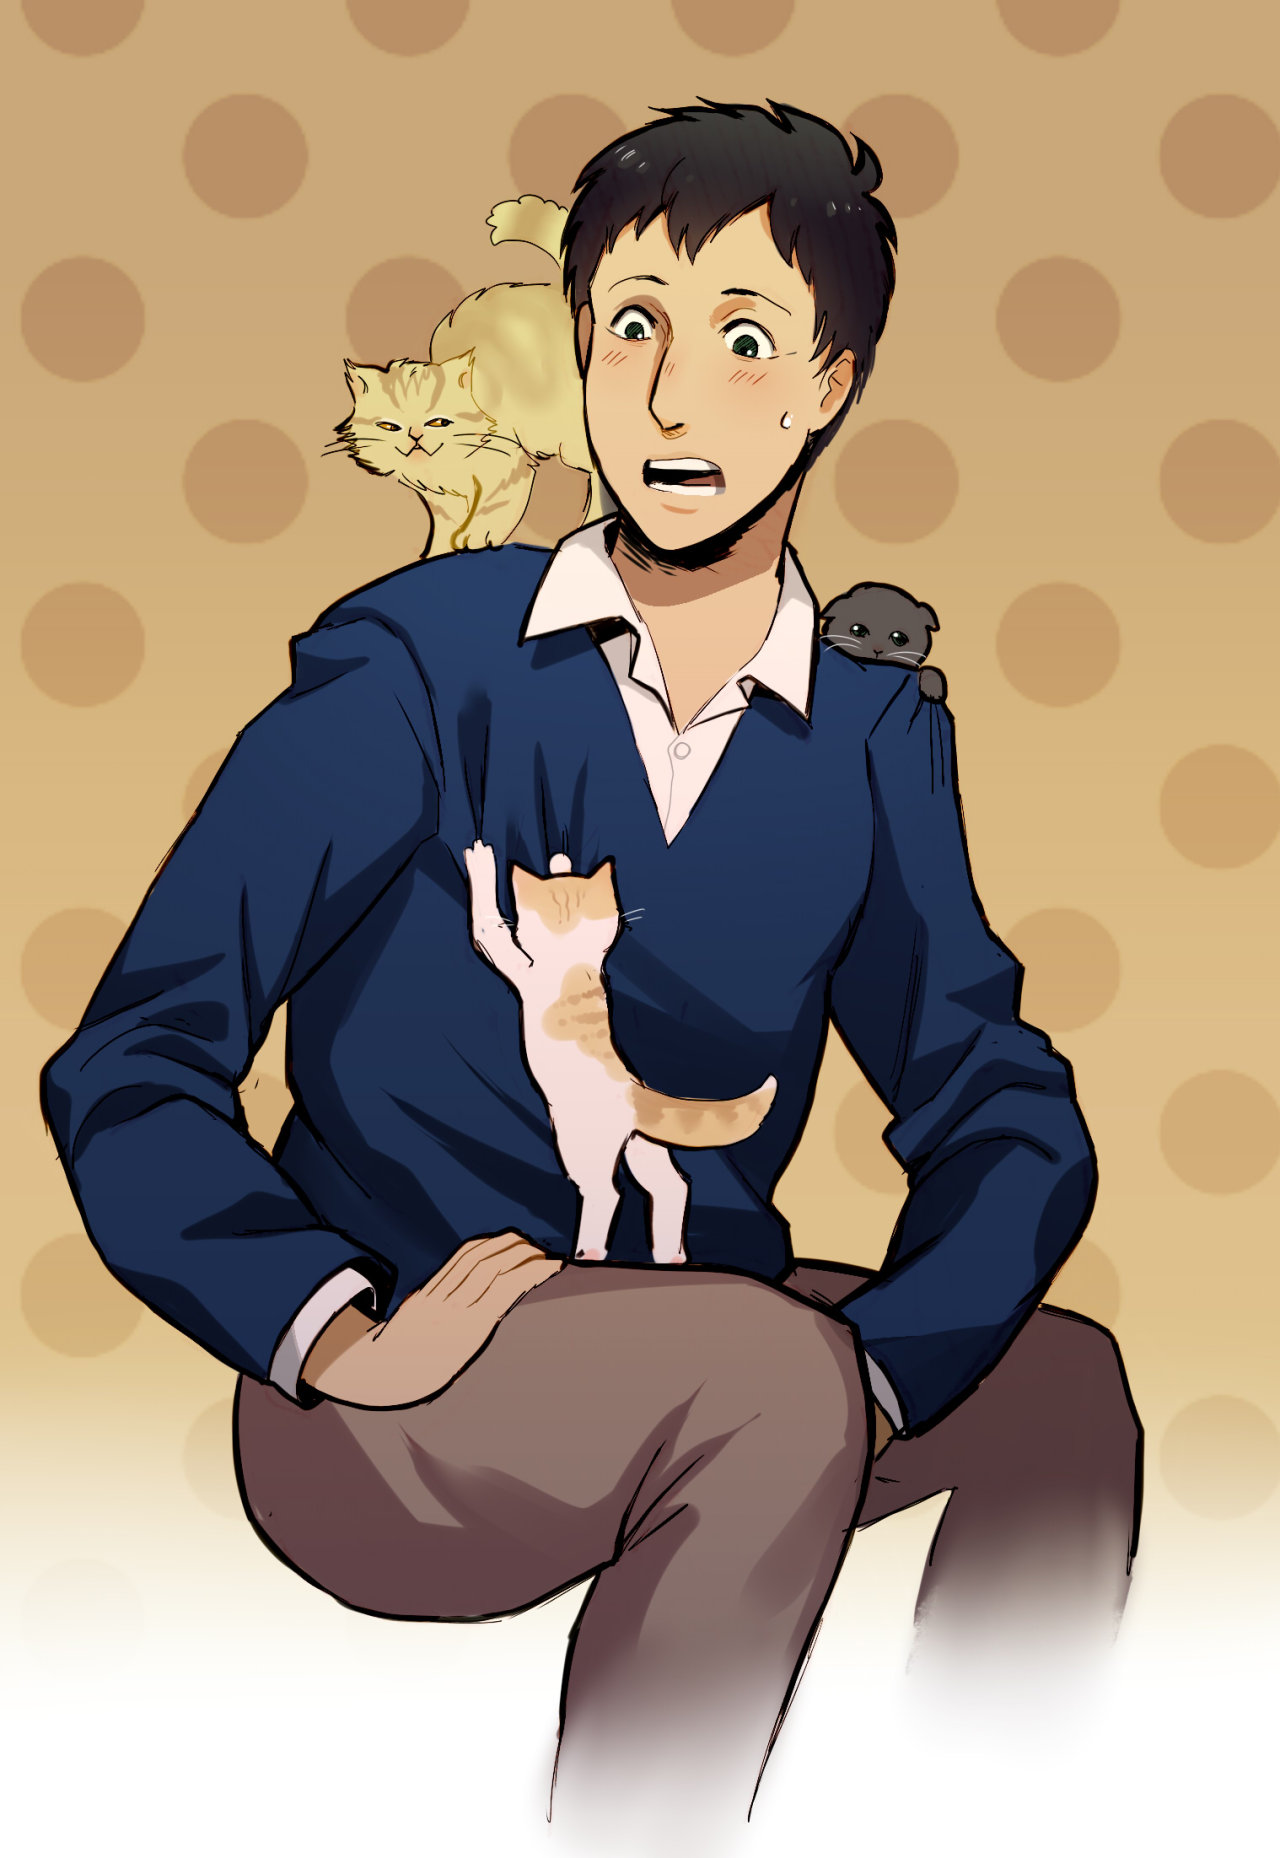 Babies~ #attack on titan #bertolt hoover#cats#MY SON #my precious baby boy  #he deserved better #2017#doodle#art tag#fanart #my favorite thing about this is the Reiner cat haha